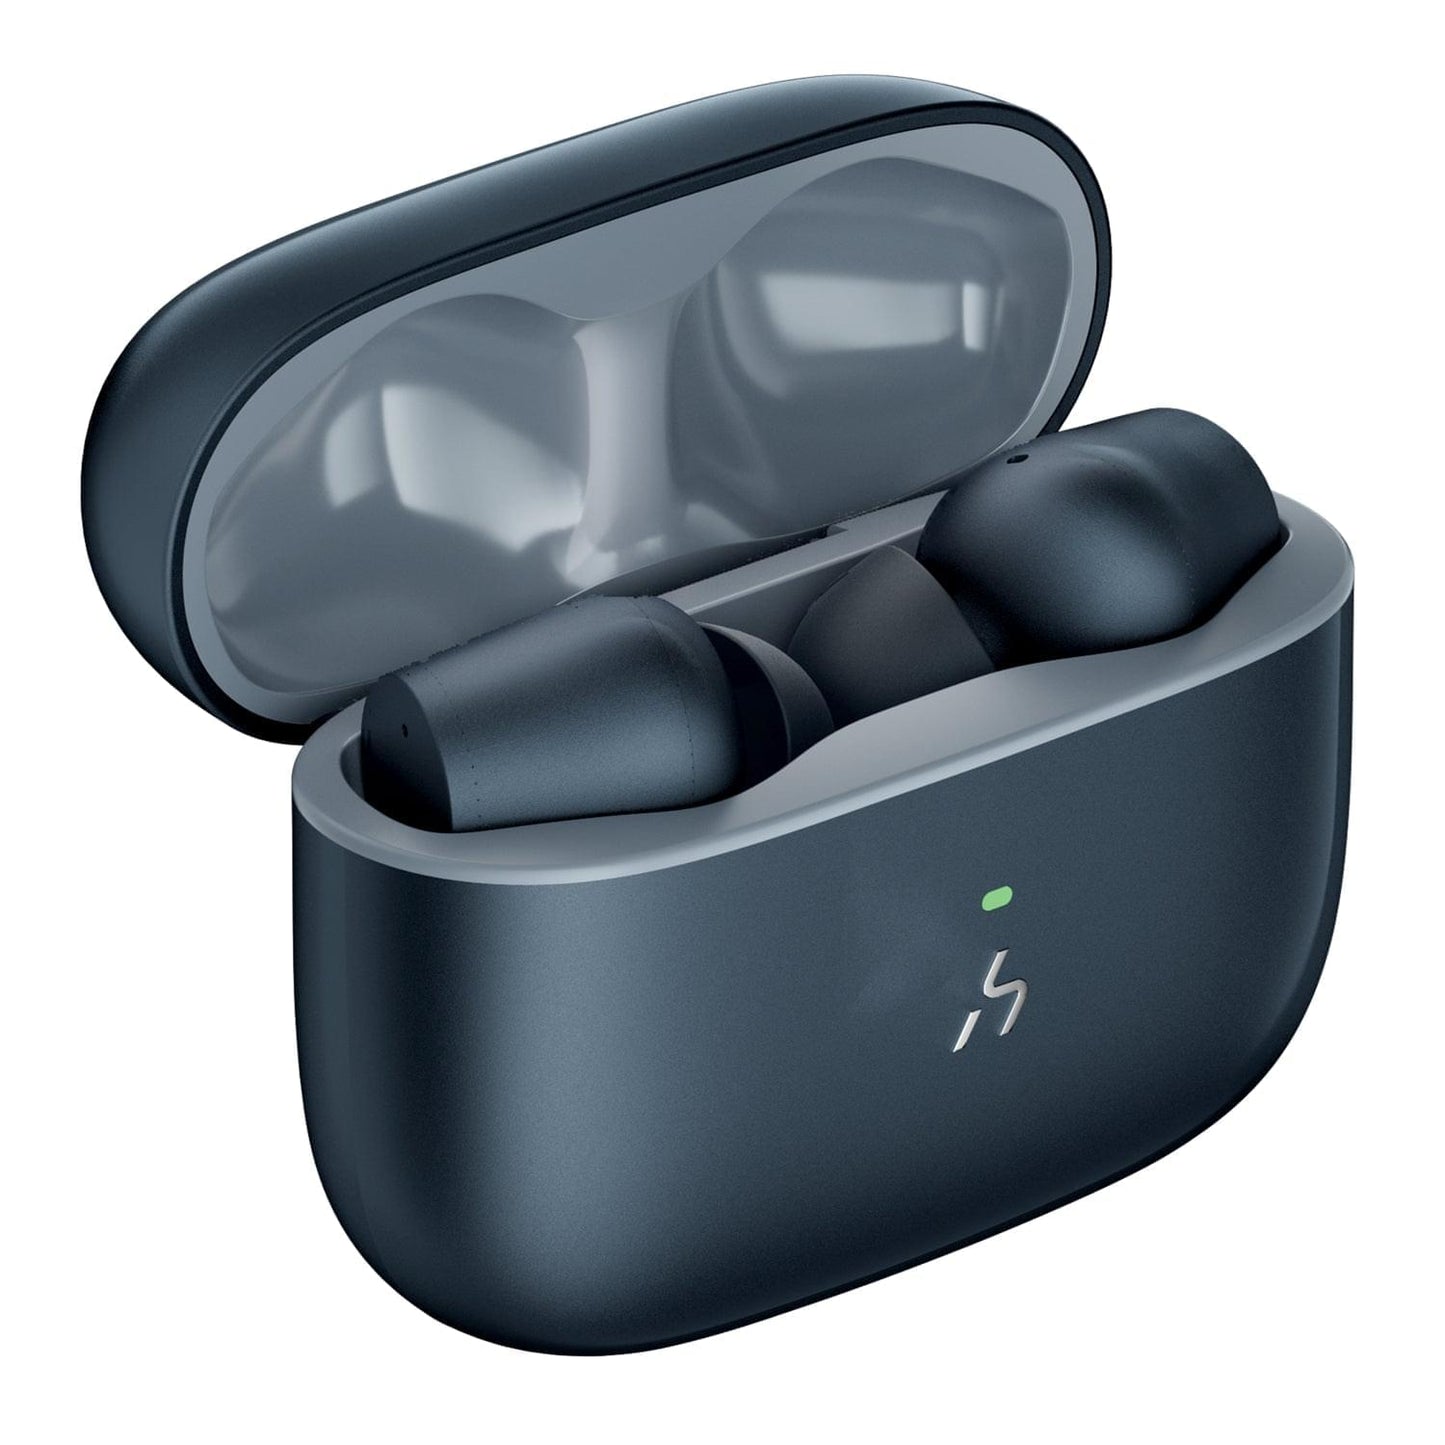 HAKII Time Pro Noise Cancelling True Wireless Earbuds (Black)